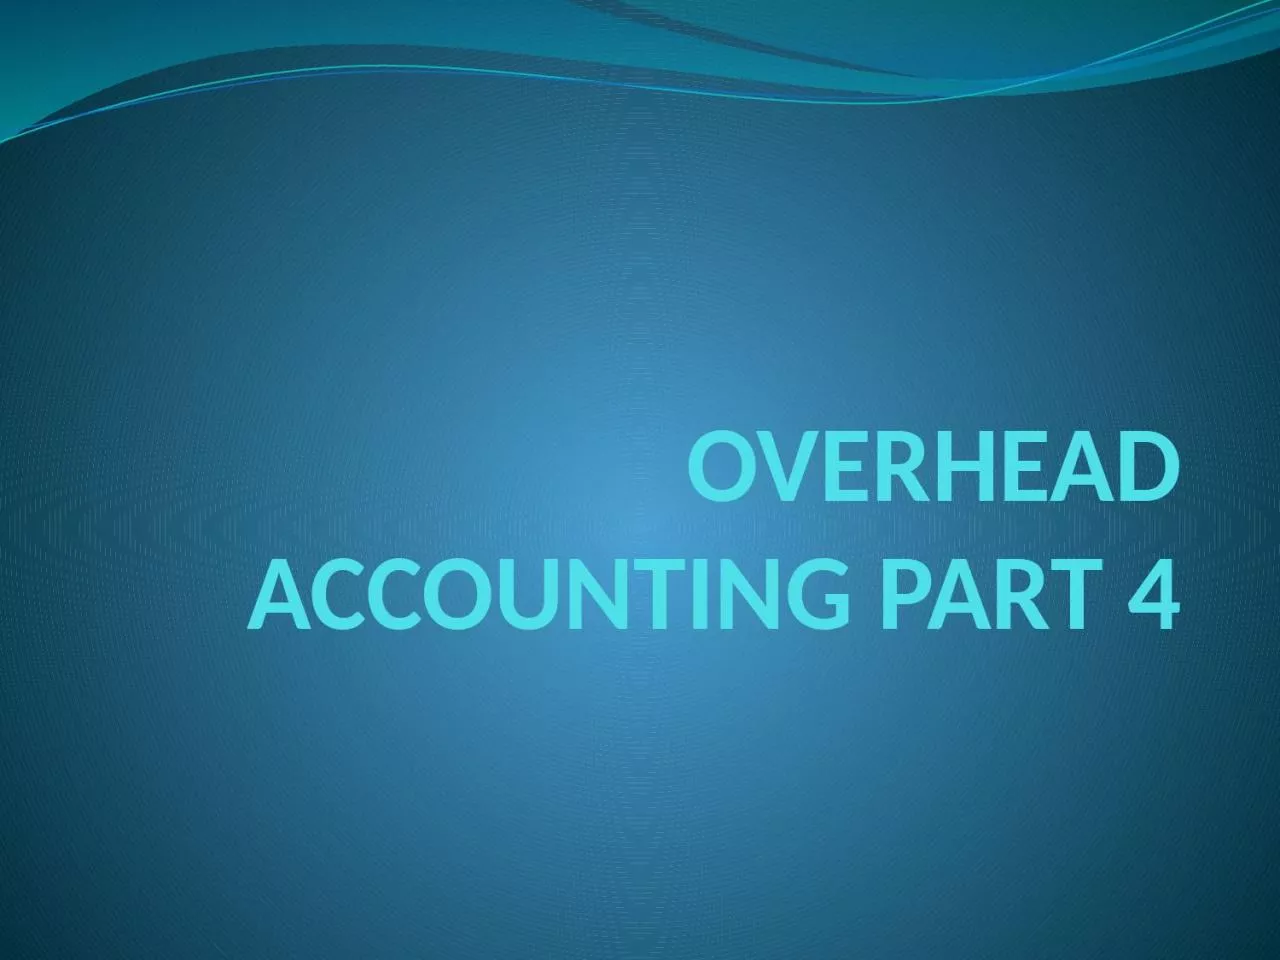 OVERHEAD ACCOUNTING PART 4